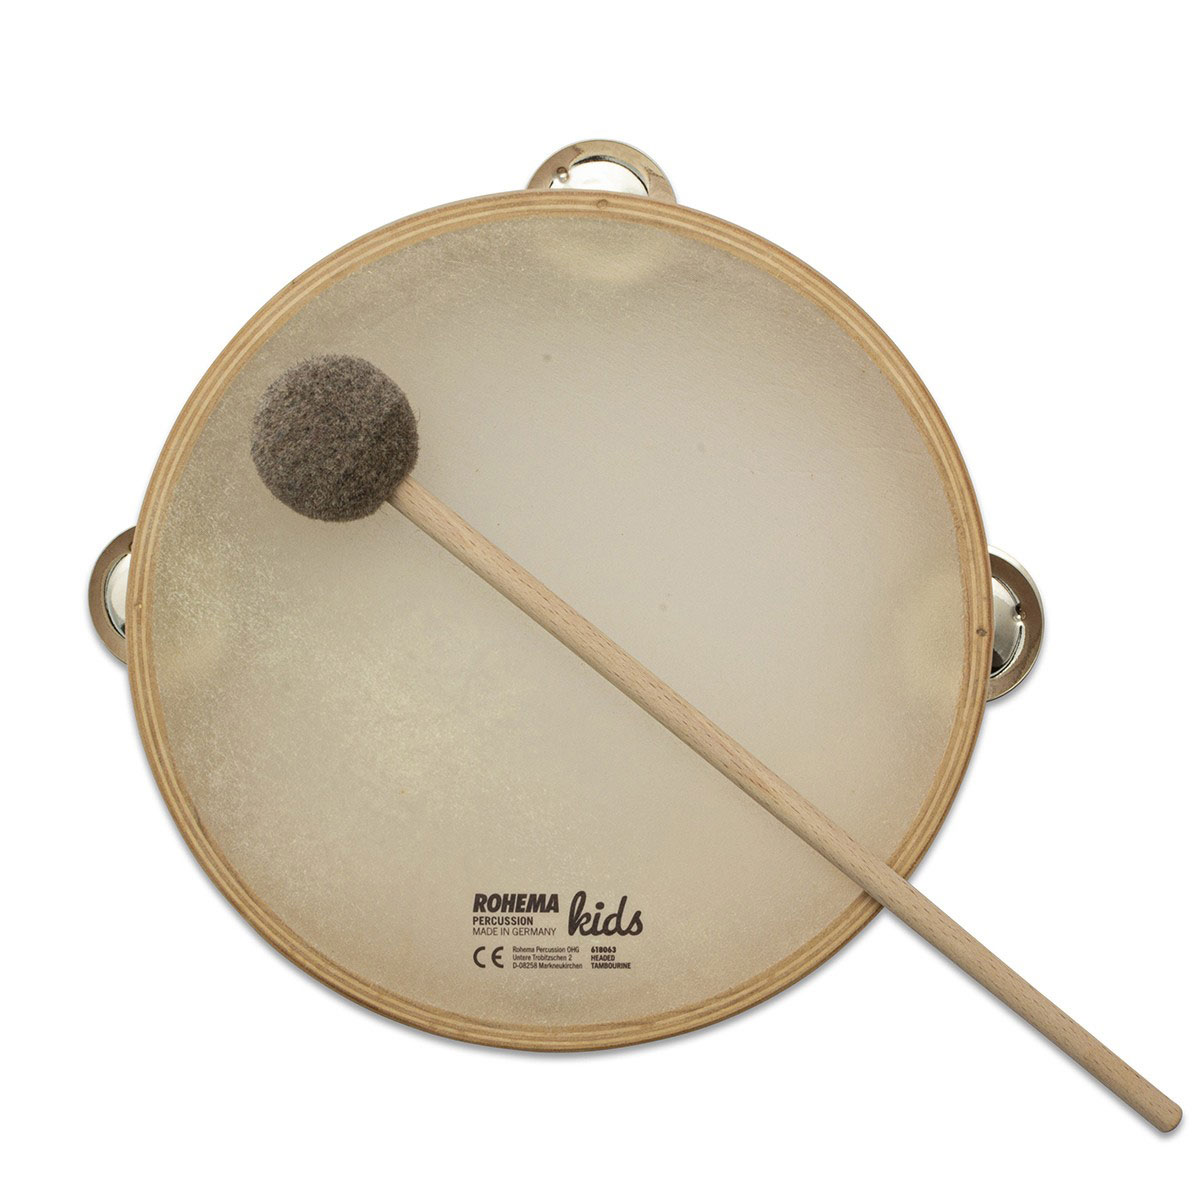 ROHEMA TAMBOURIN 3 CYMBALETTES 20CM + 1 BAGUETTE